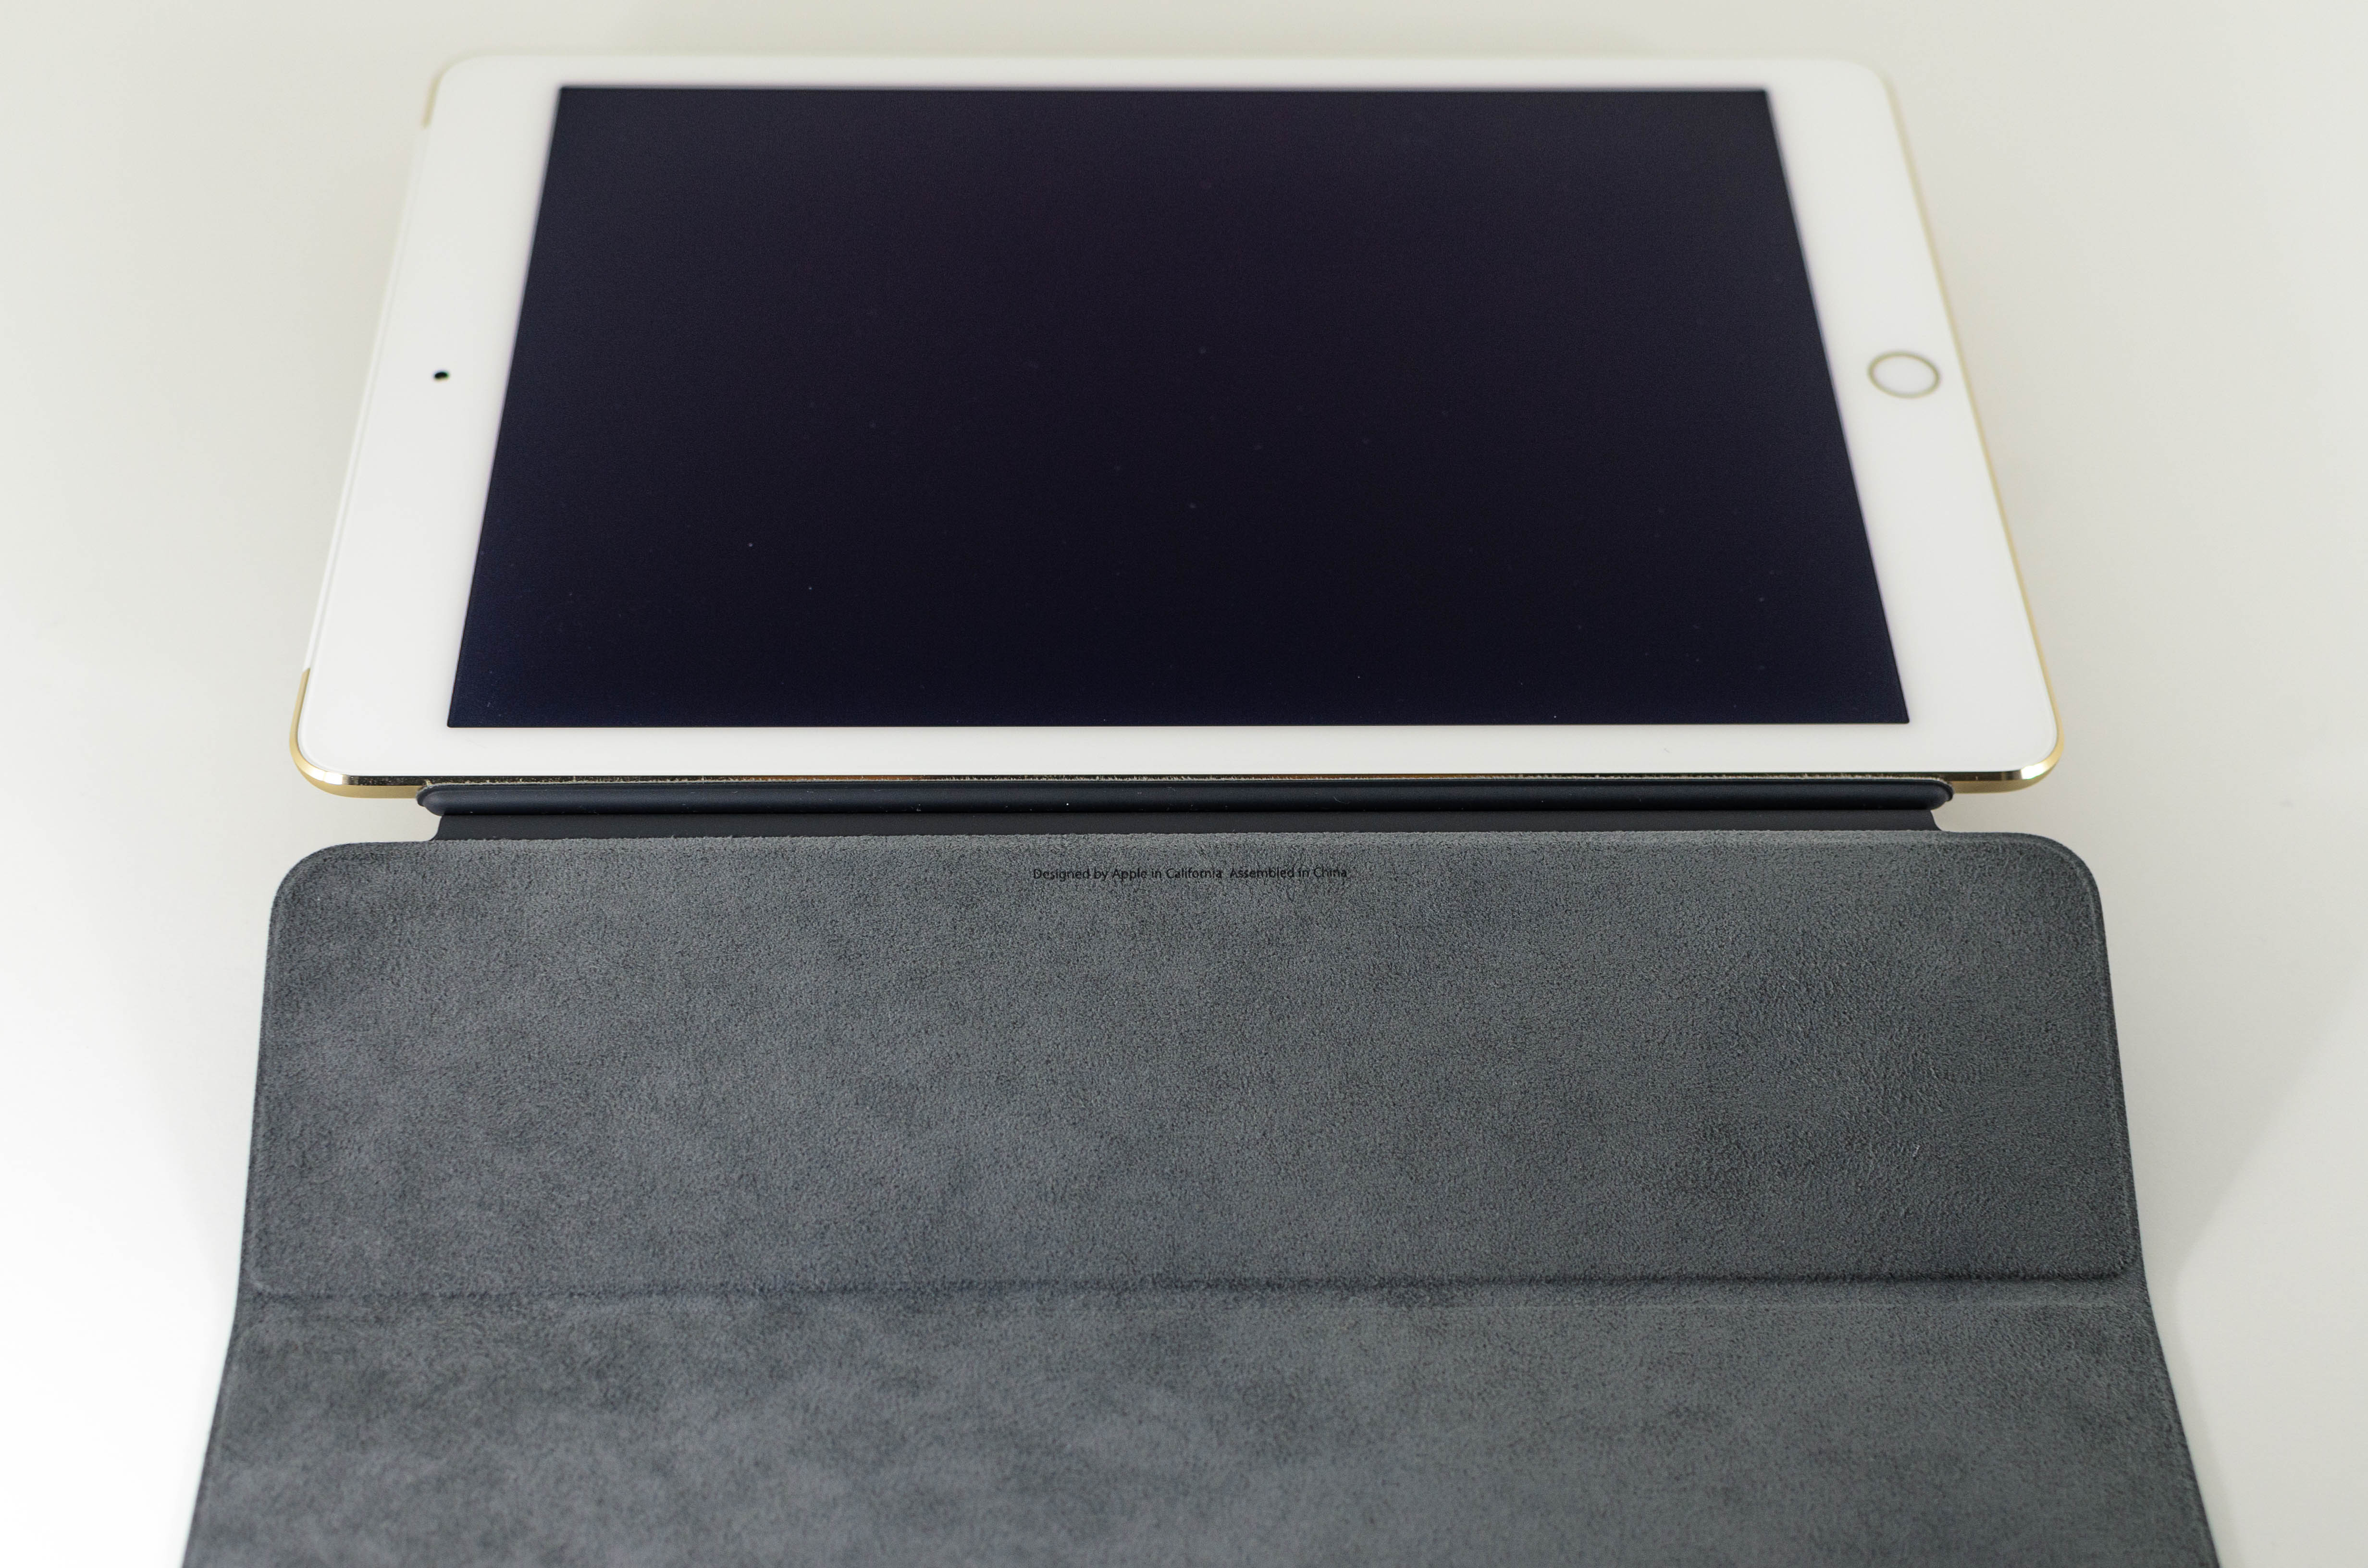 iPad Air 2 review: The iPad Air 2 delivers unparalleled value for the price  - CNET